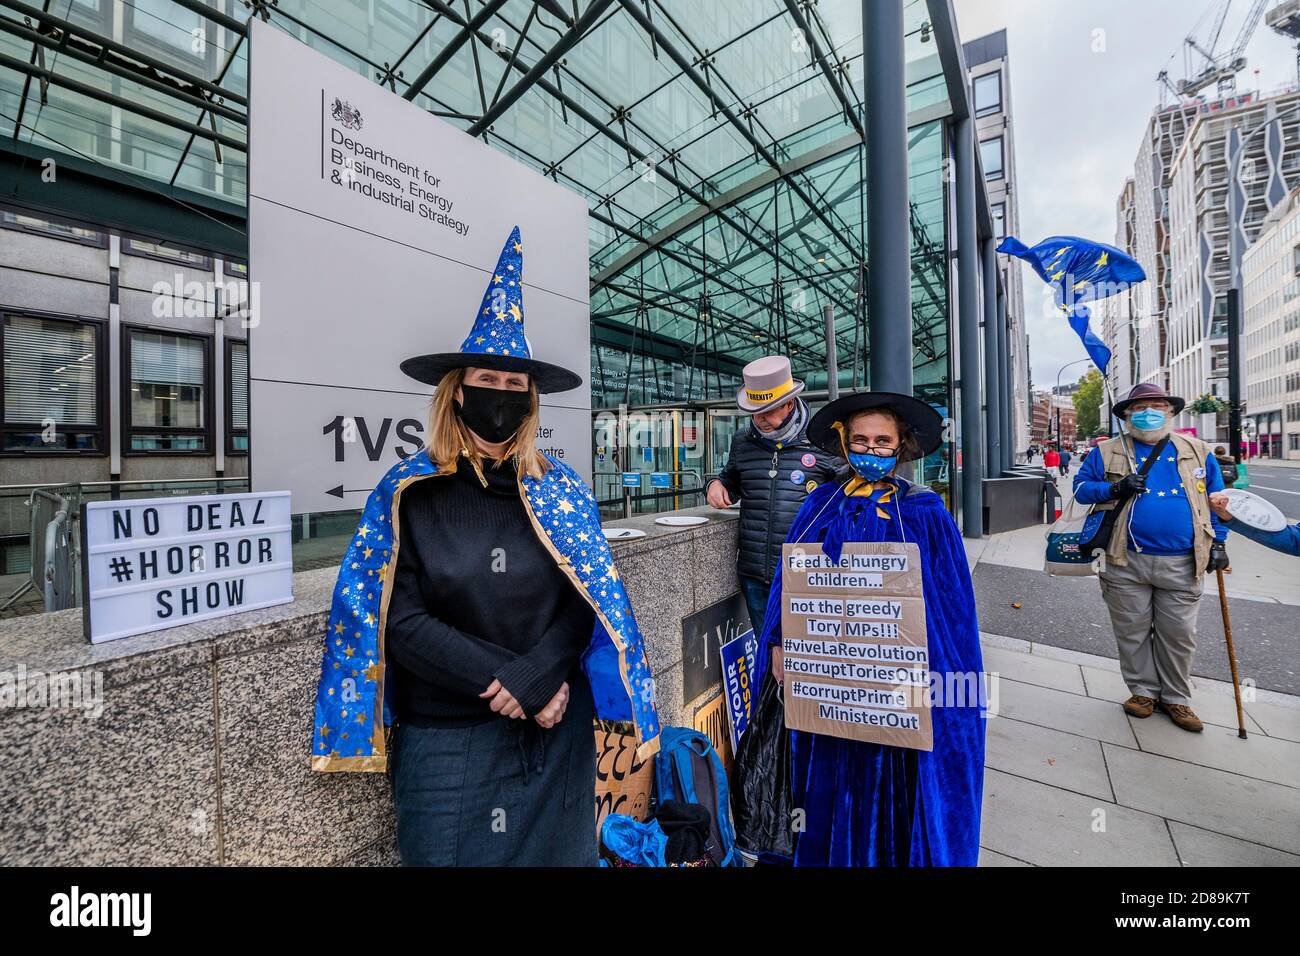 London, UK. 28th Oct, 2020. Pro EU protesters from SODEM, in Halloween costumes, at the Department for Business Energy and Industrial Strategy where trade talks continue. Credit: Guy Bell/Alamy Live News Stock Photo